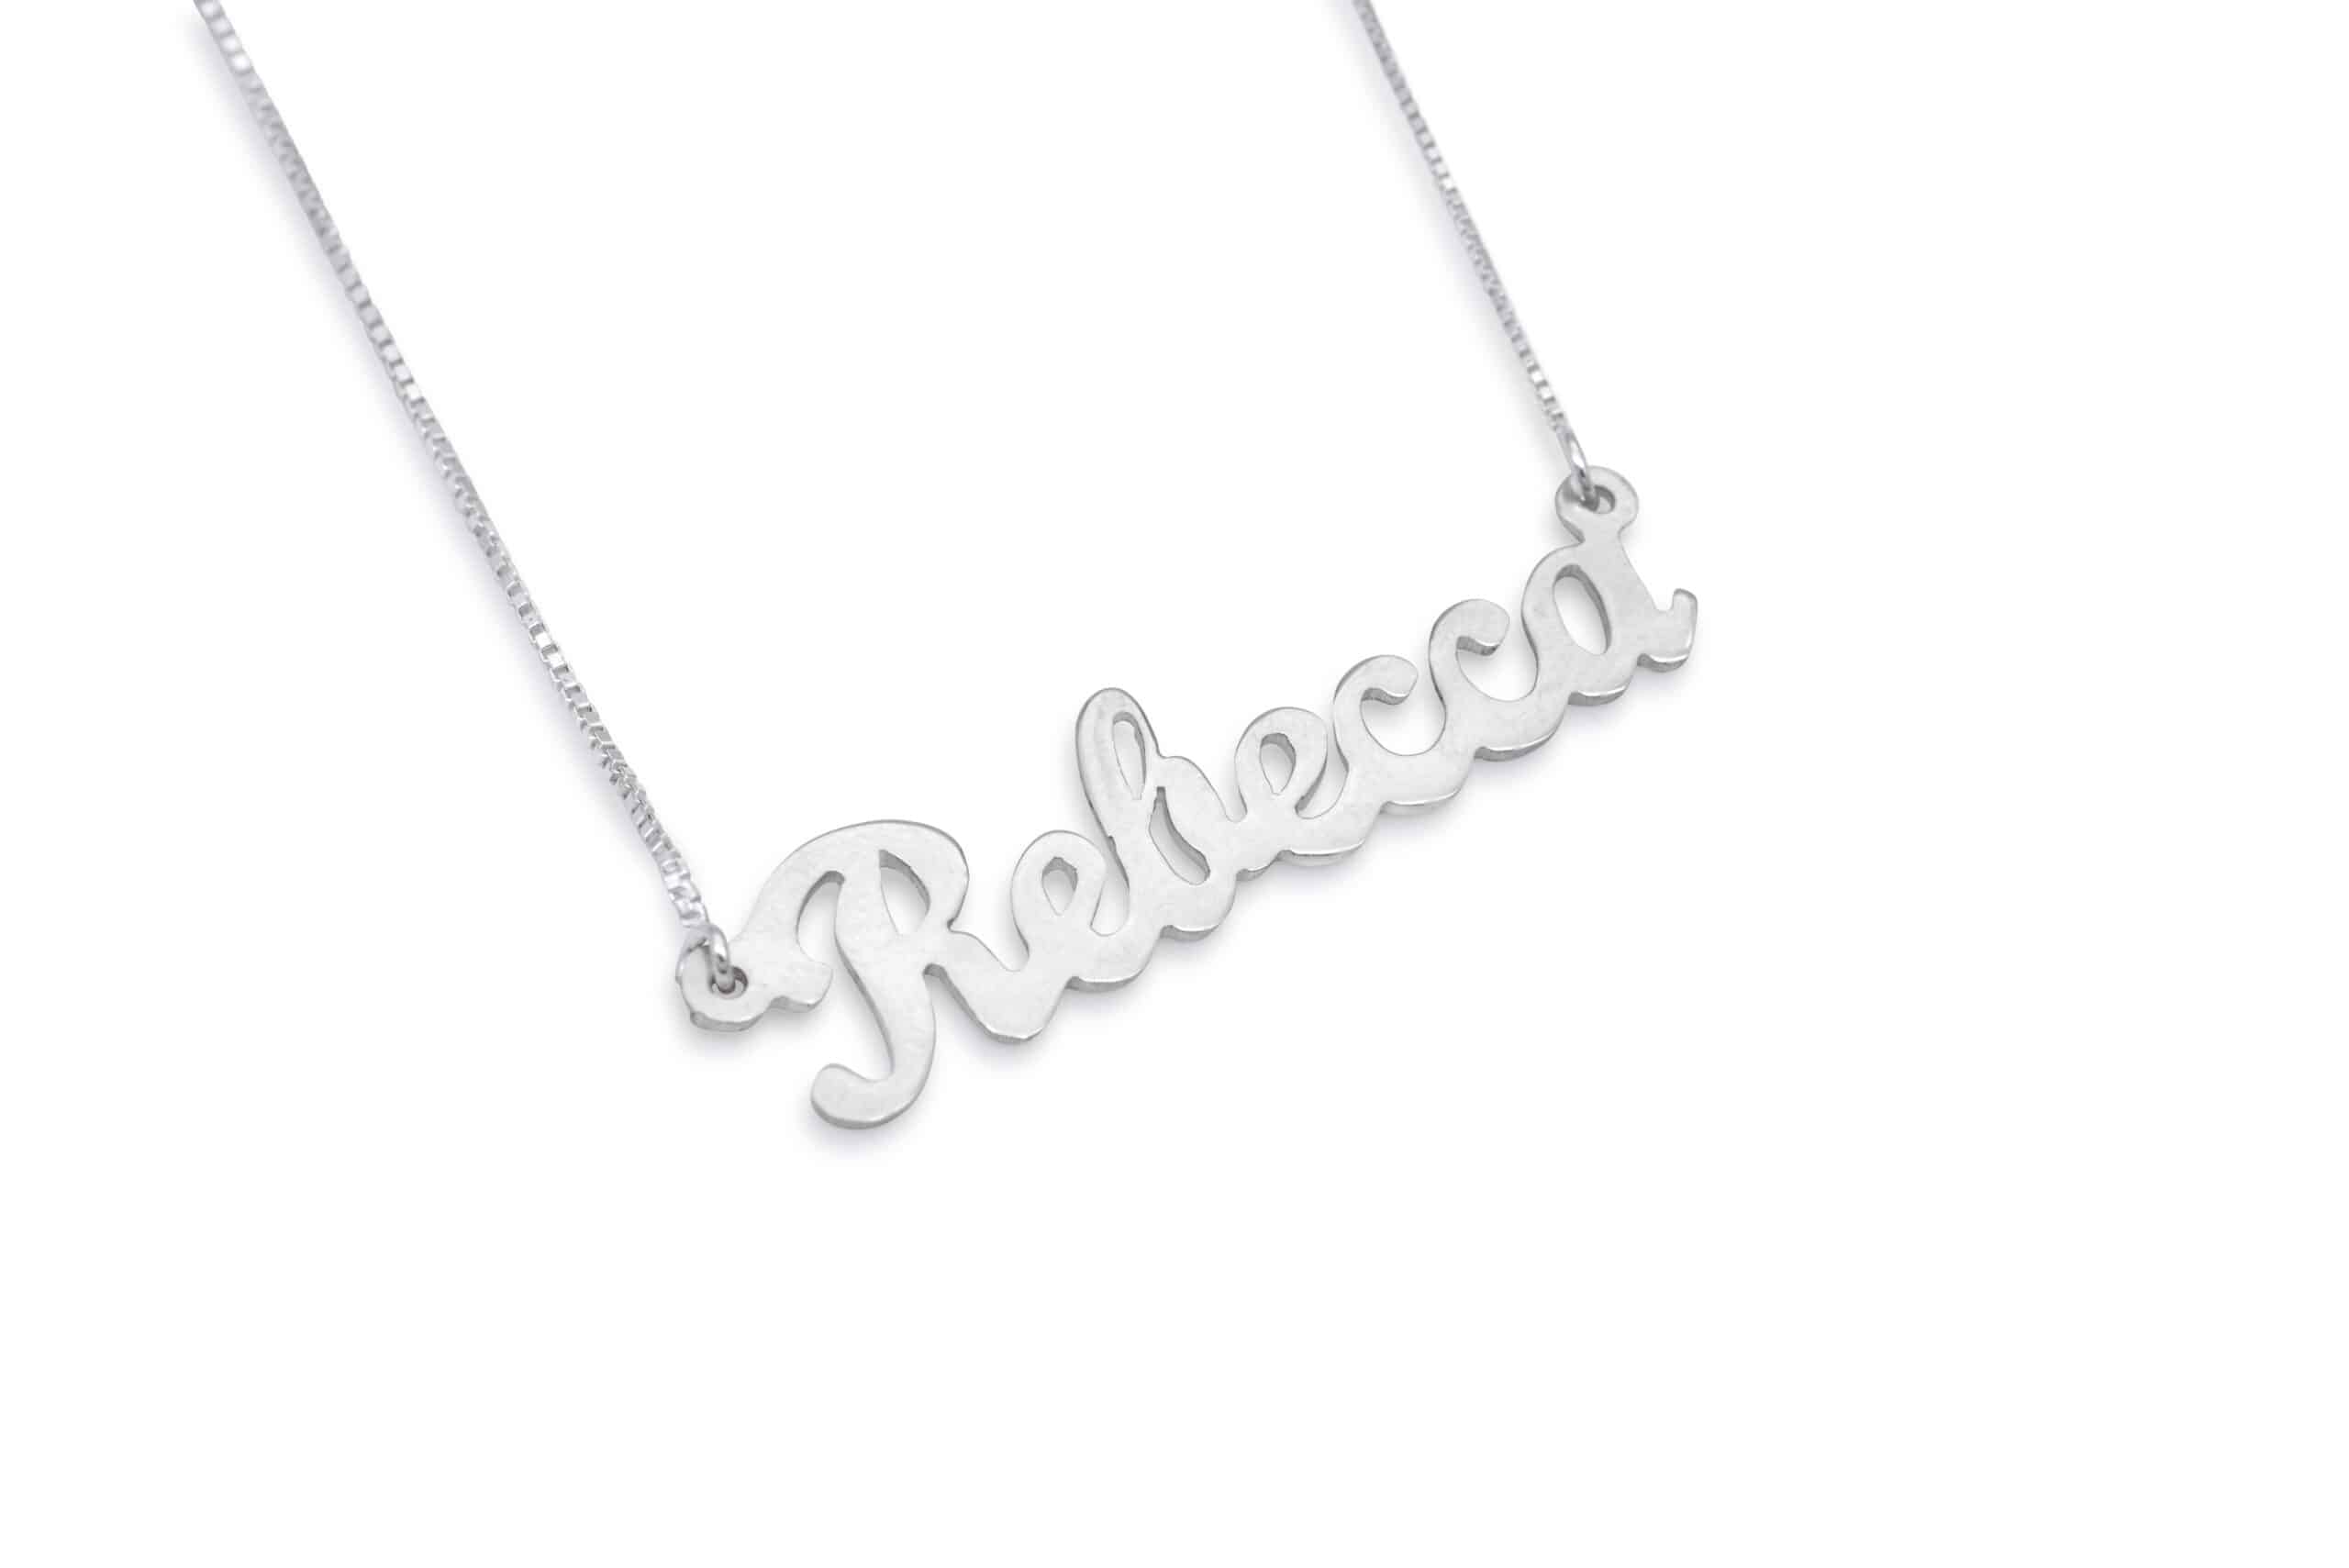 Cursive English Name Sterling Silver Necklace